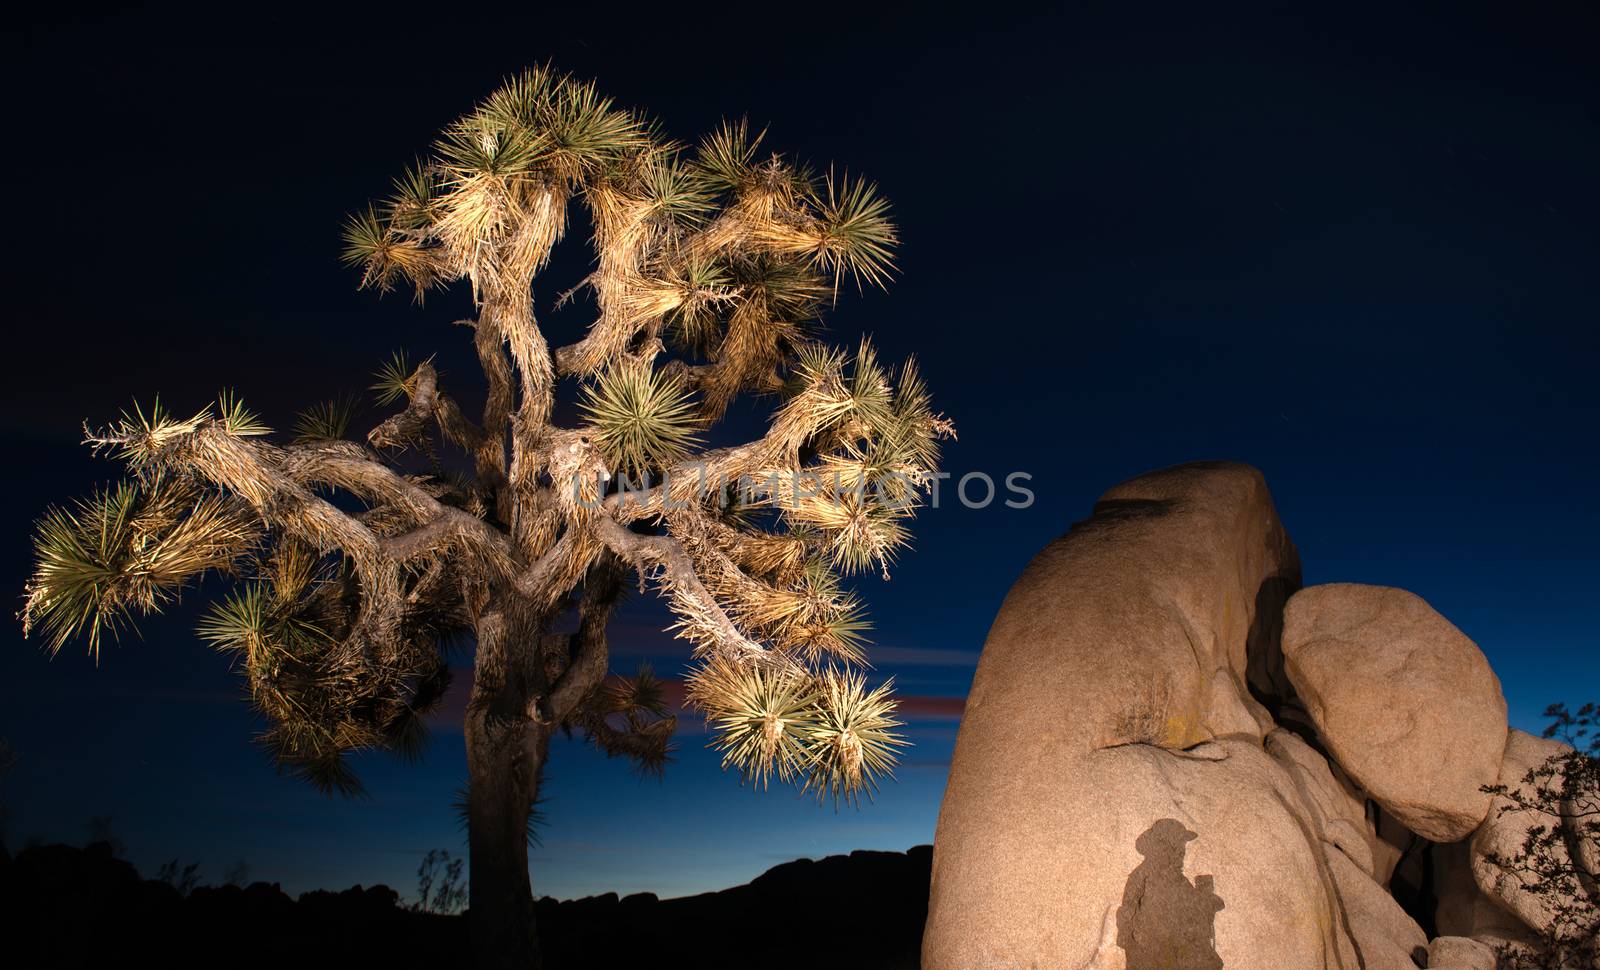 Sunset Shadow Rock Formation Joshua Tree National Park by ChrisBoswell